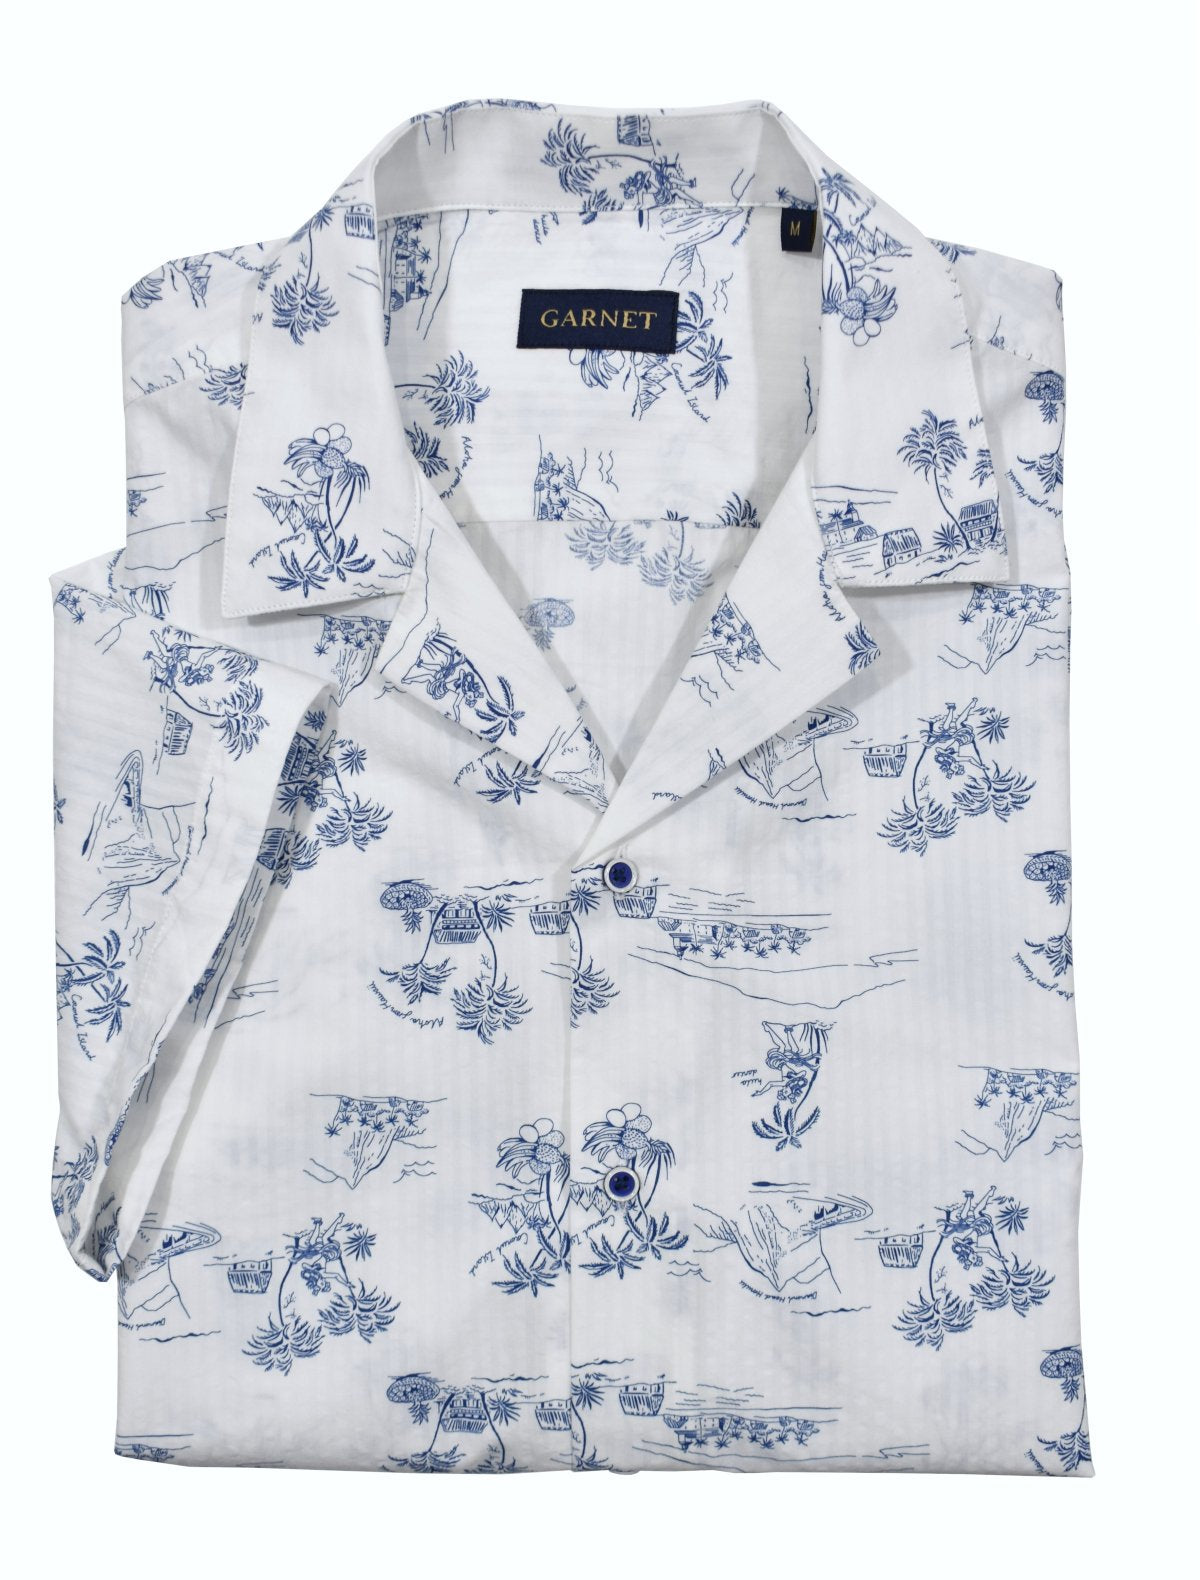 Relax and dream away in a cool casual lifestyle. Made with soft white cotton seersucker fabric and a matching island motif print in warm blue, this shirt brings a cool and comfortable look. Its pajama top collar adds to the relaxed fit, making it perfect for your island getaway.